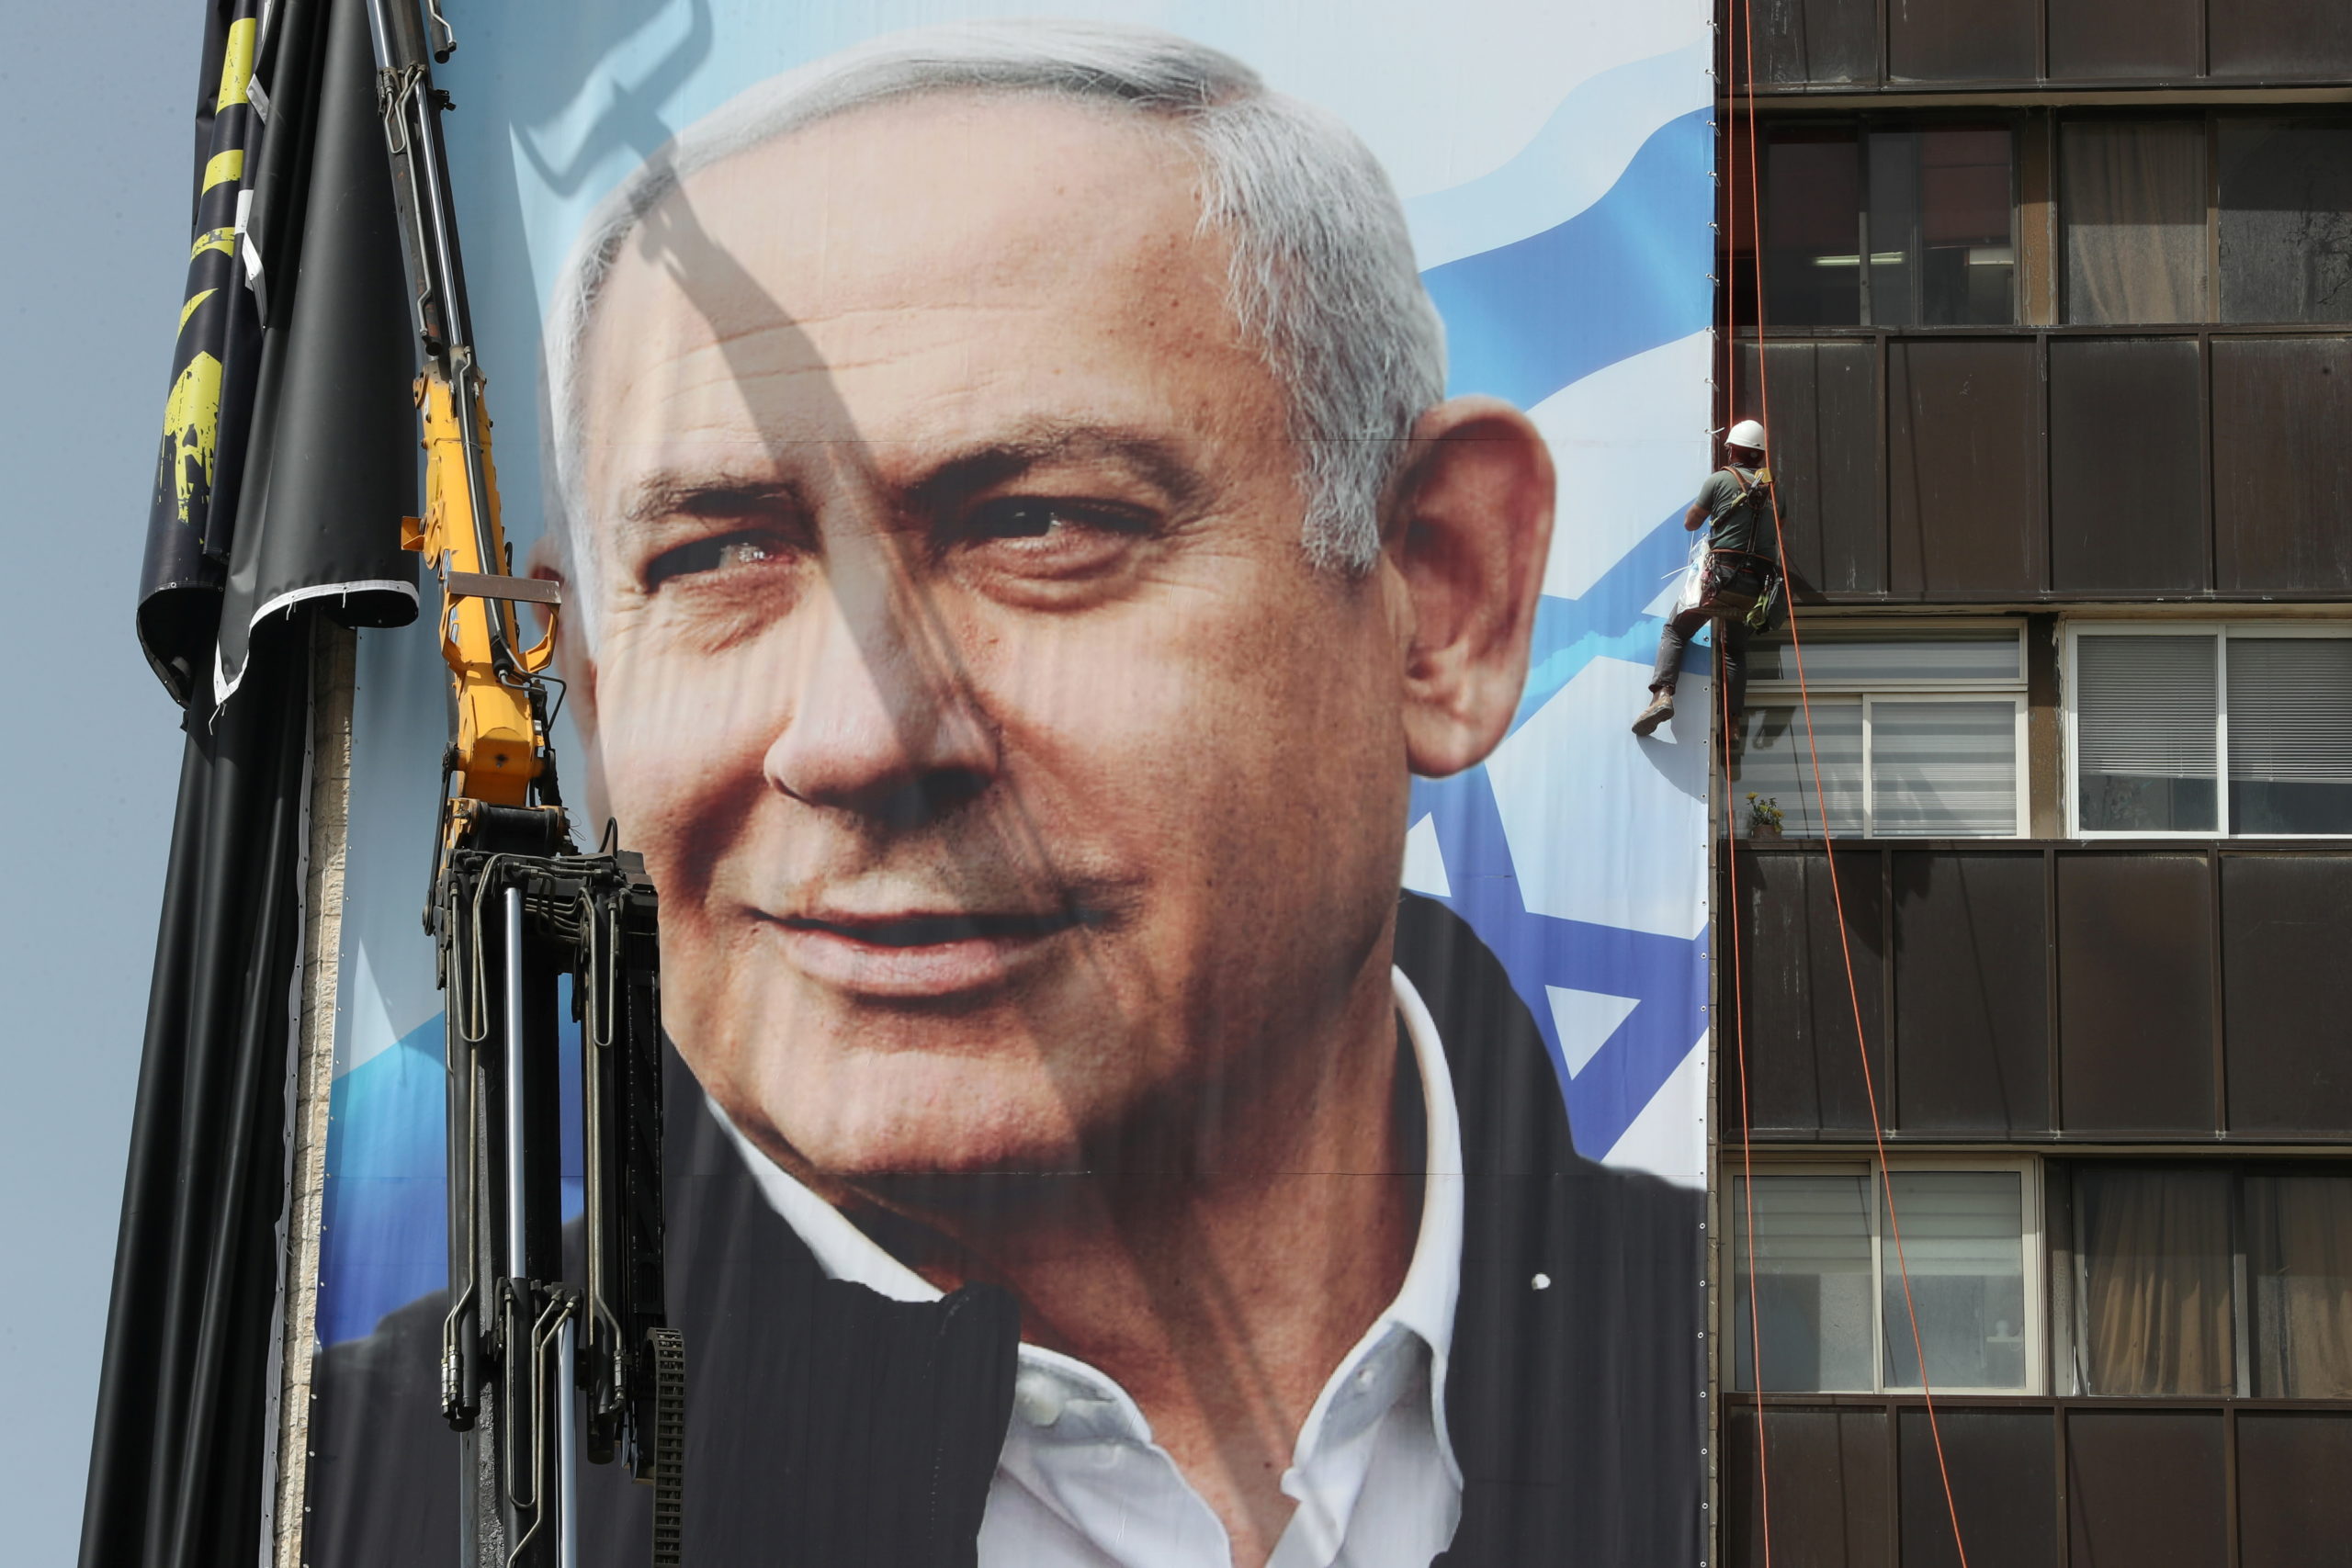 A worker hangs a Likud party election campaign banner depicting Israeli Prime Minister Benjamin Netanyahu's party leader, ahead of a March 23 vote, in Jerusalem on March 10, 2021. 